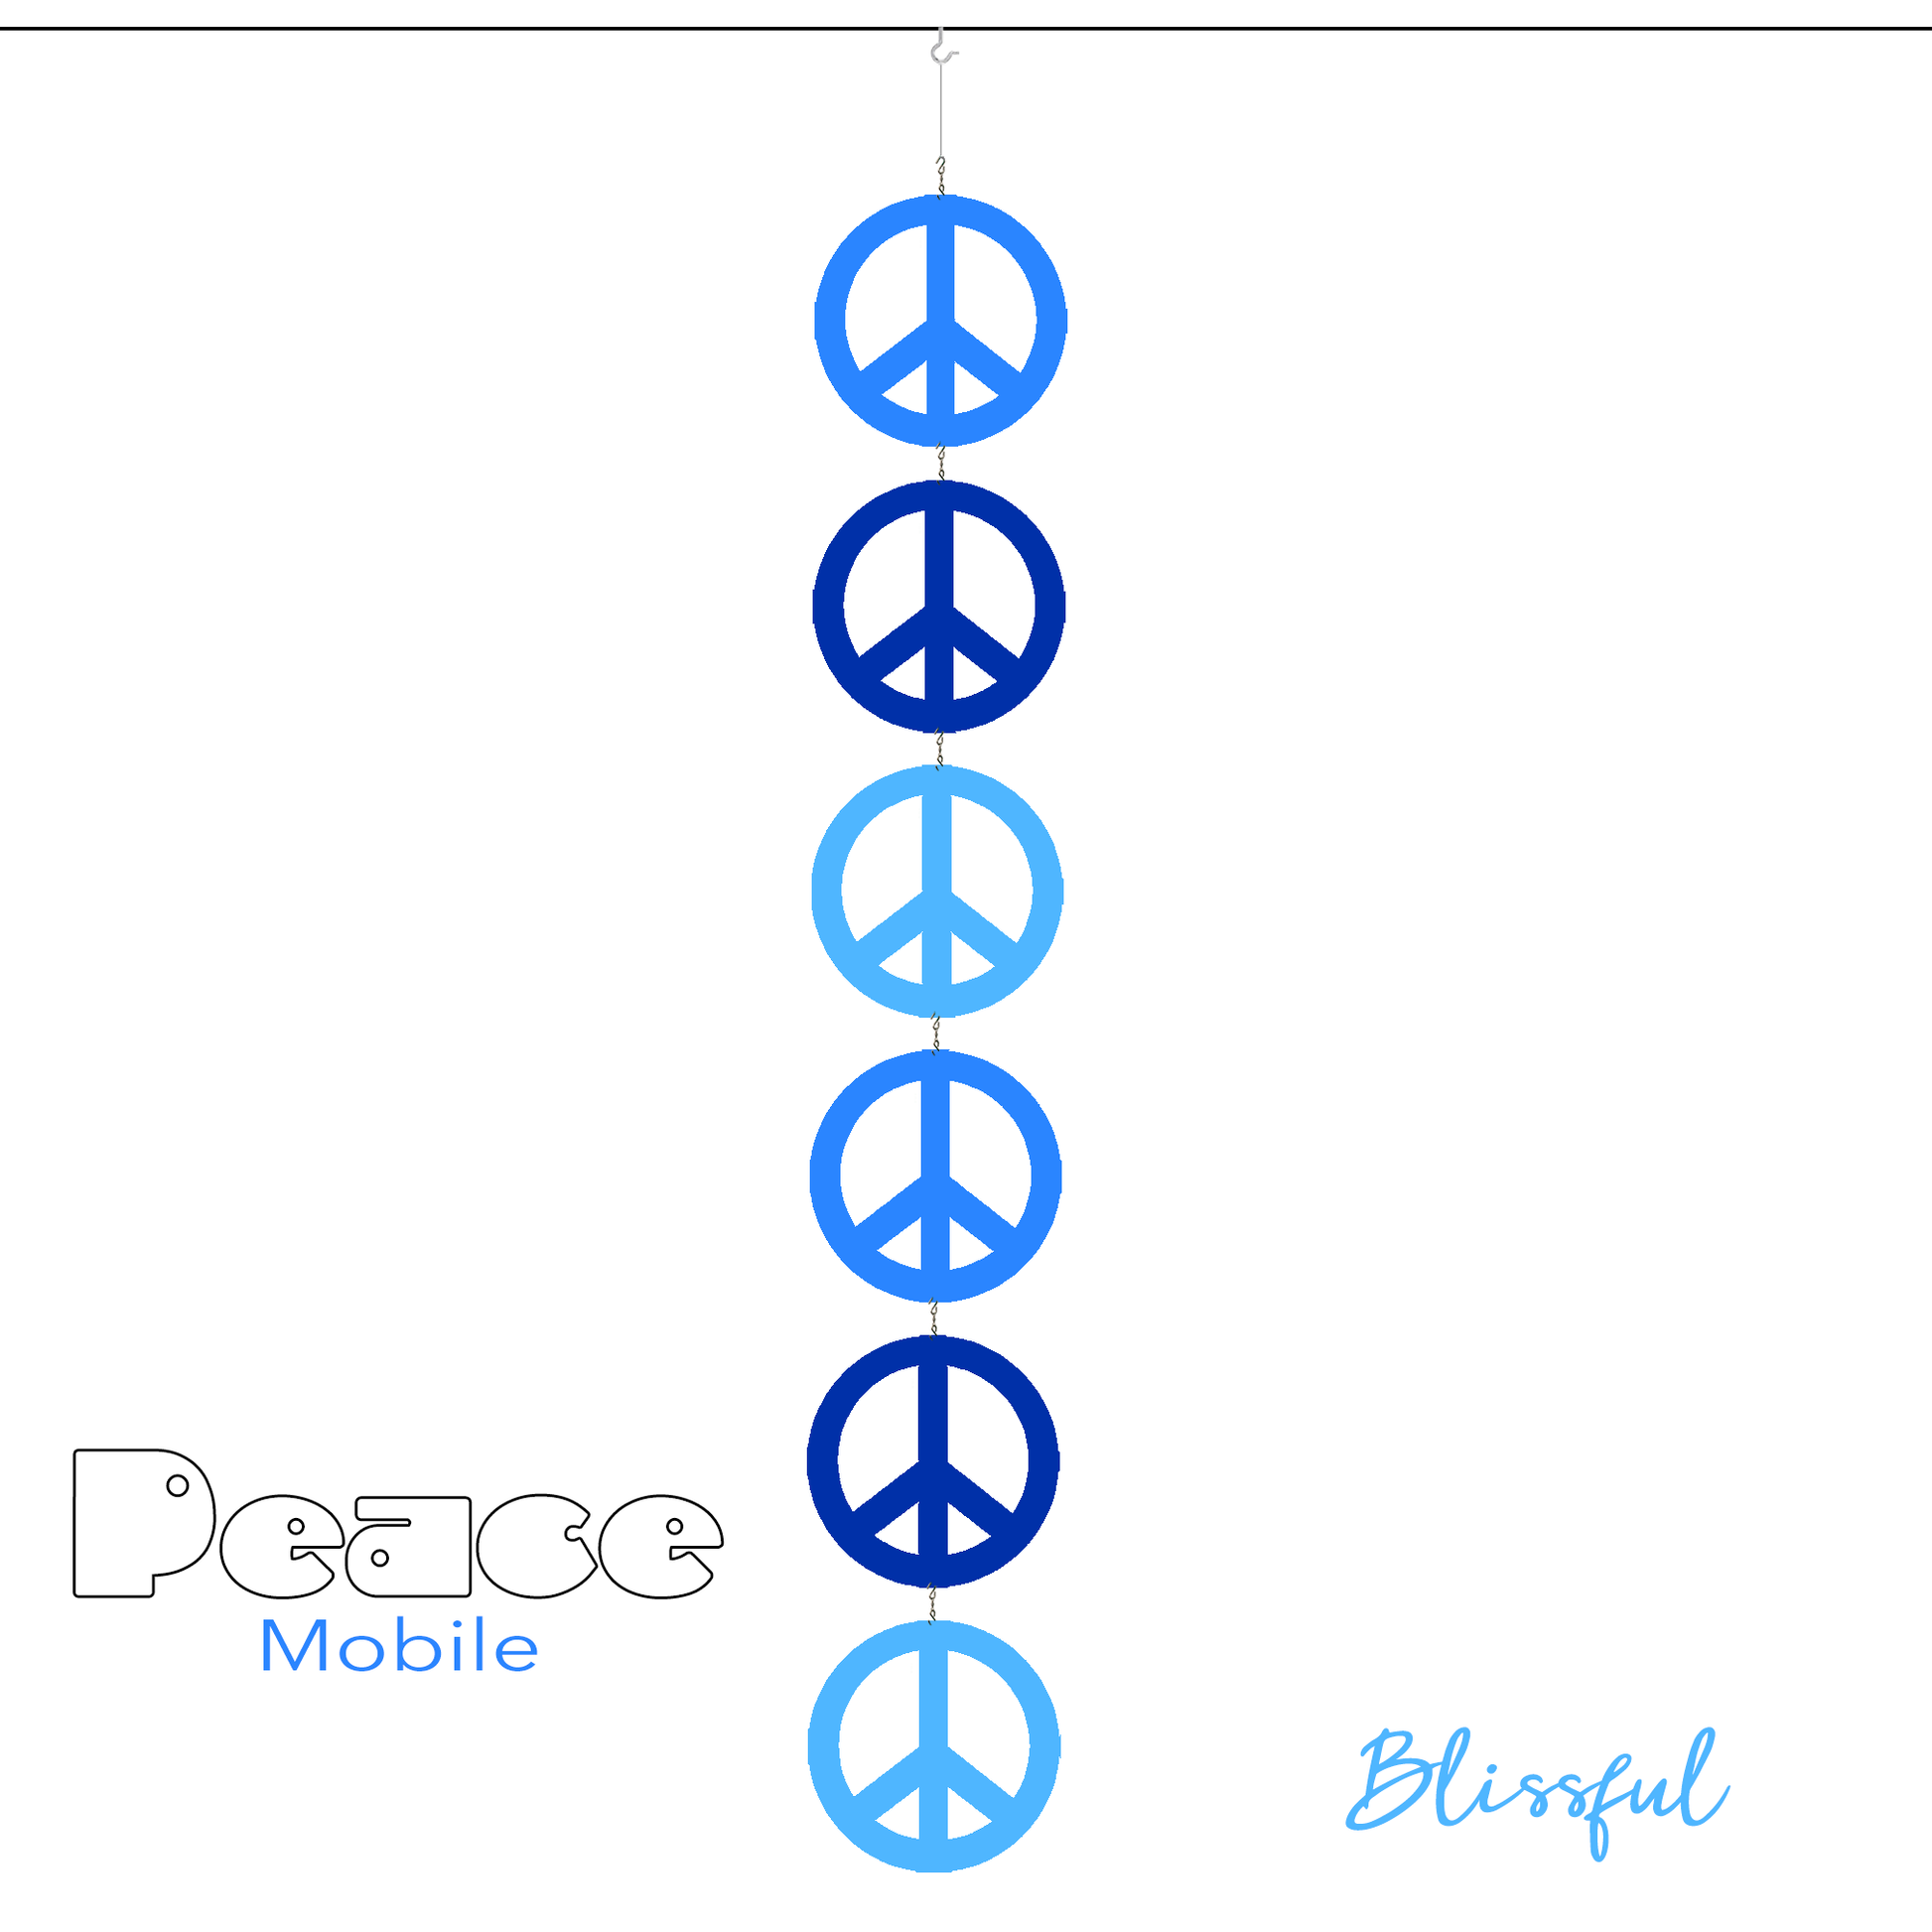 Blissful Blue Peace Mobile - 6 Peace signs in 2 shades of blue - kinetic hanging art mobile symbolizes World Peace - by AtomicMobiles.com